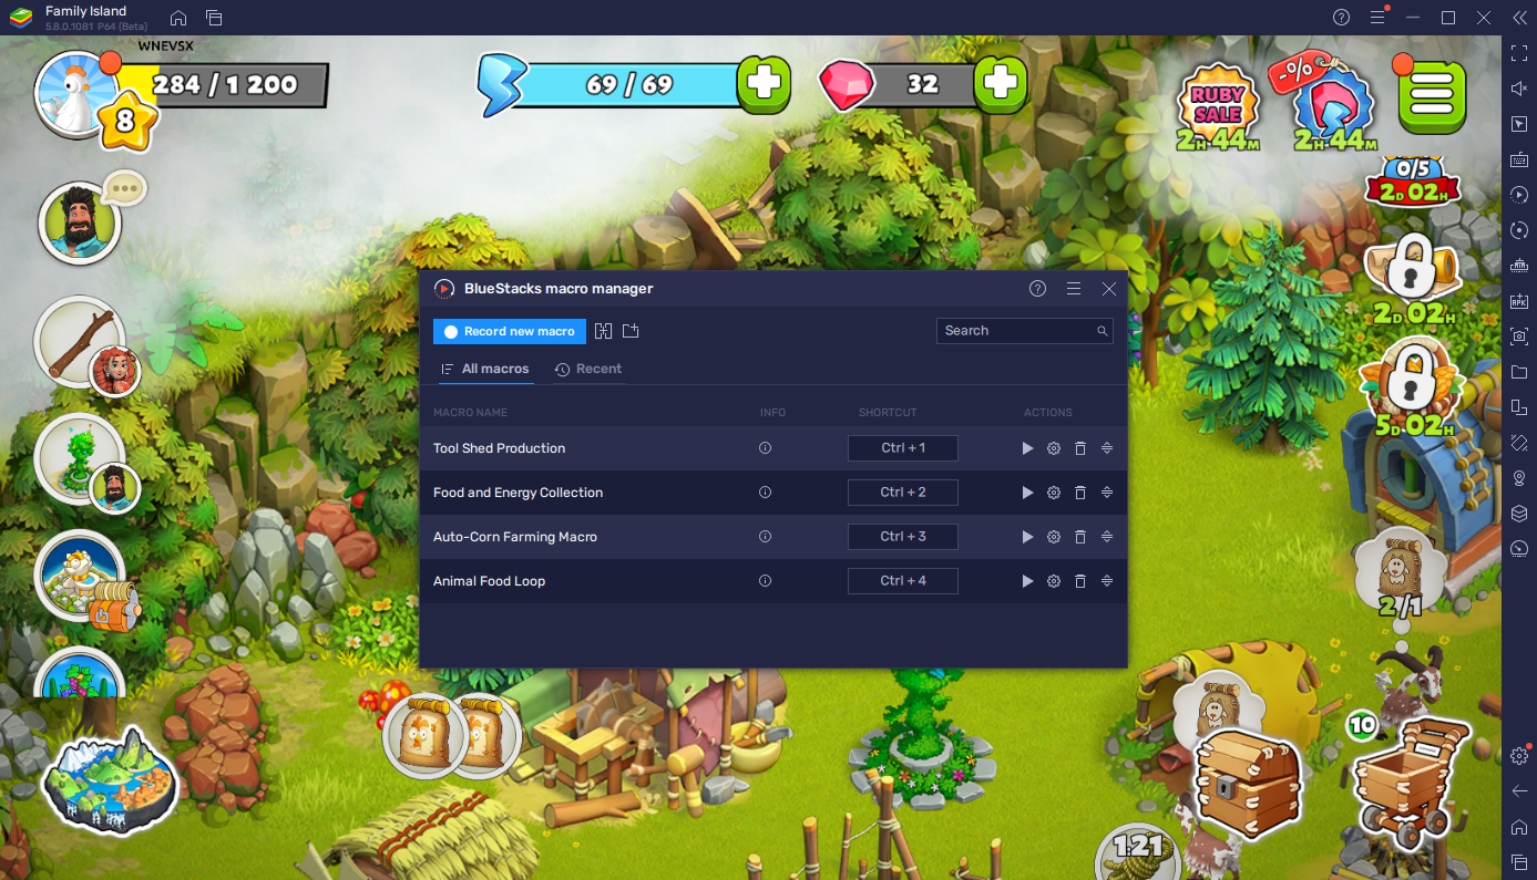 How to Play Family Island — Farming game on PC with BlueStacks